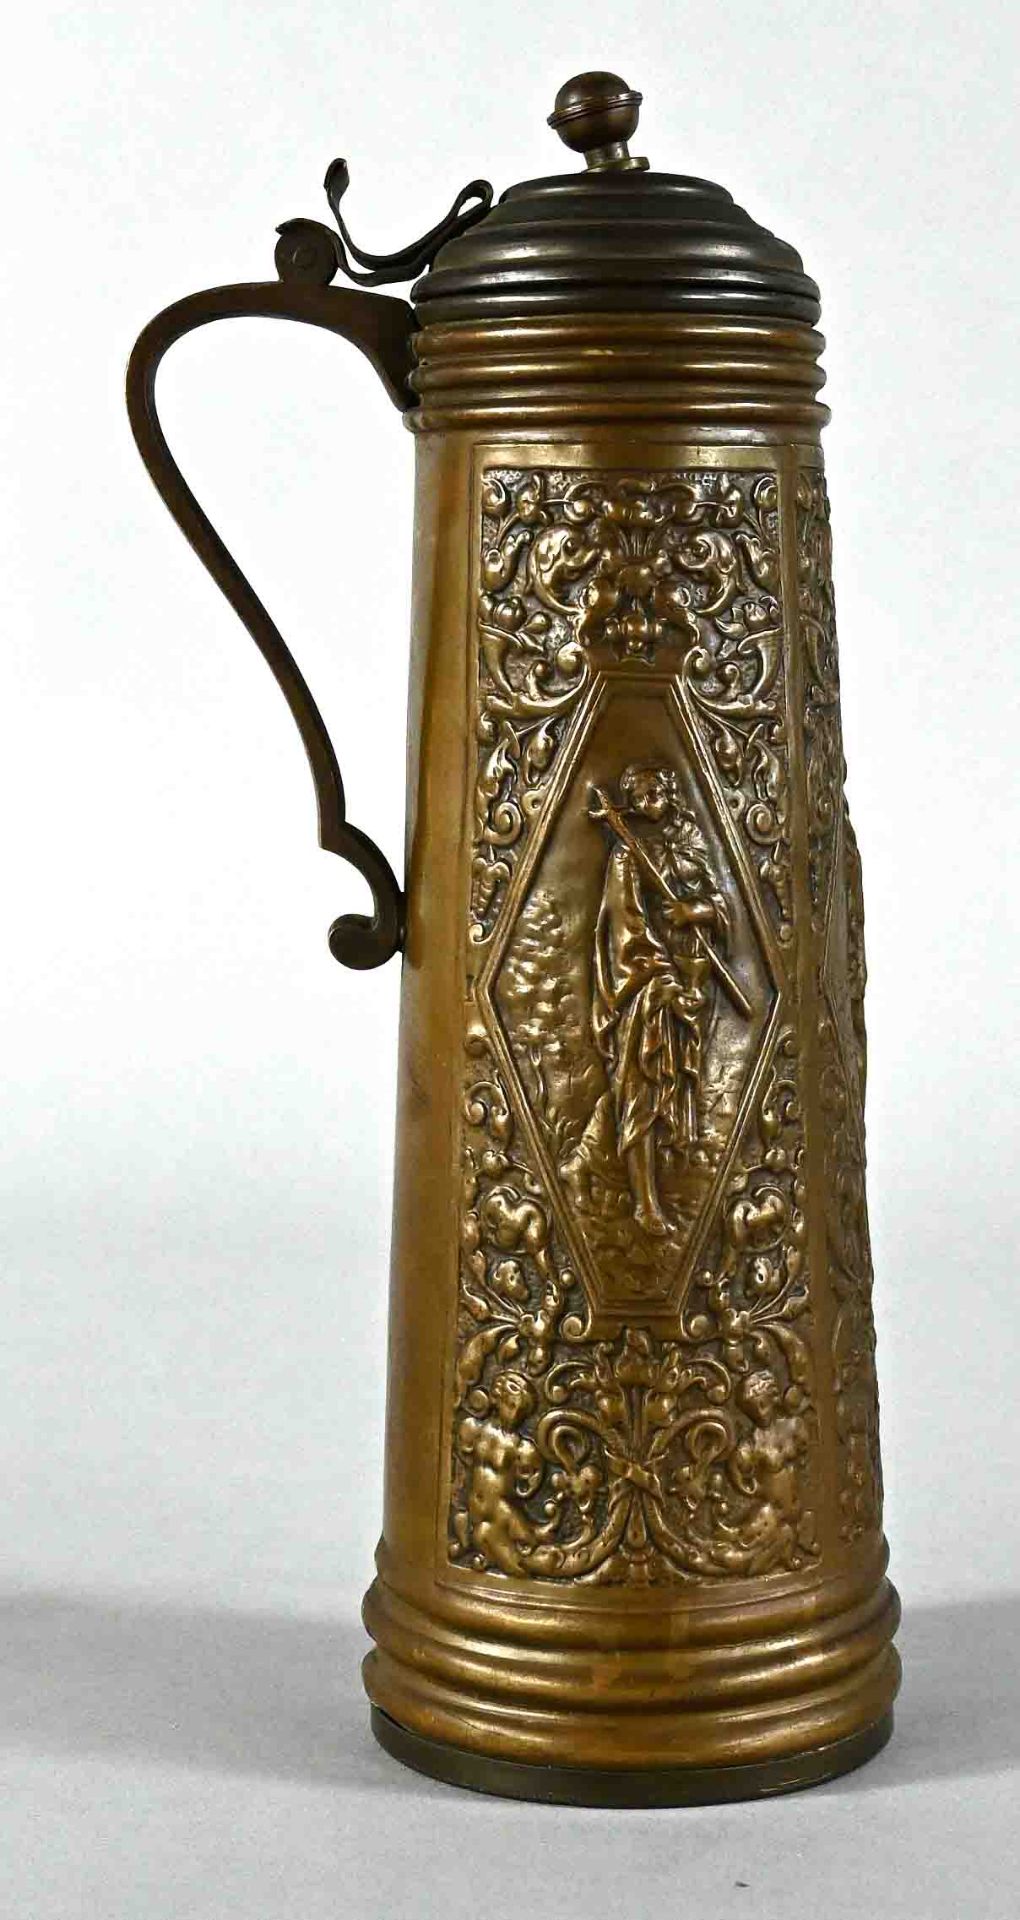 Copper jug, German circa 1900, richly moulded relief depictions with floral tendrils, height 30 cm - Image 2 of 3